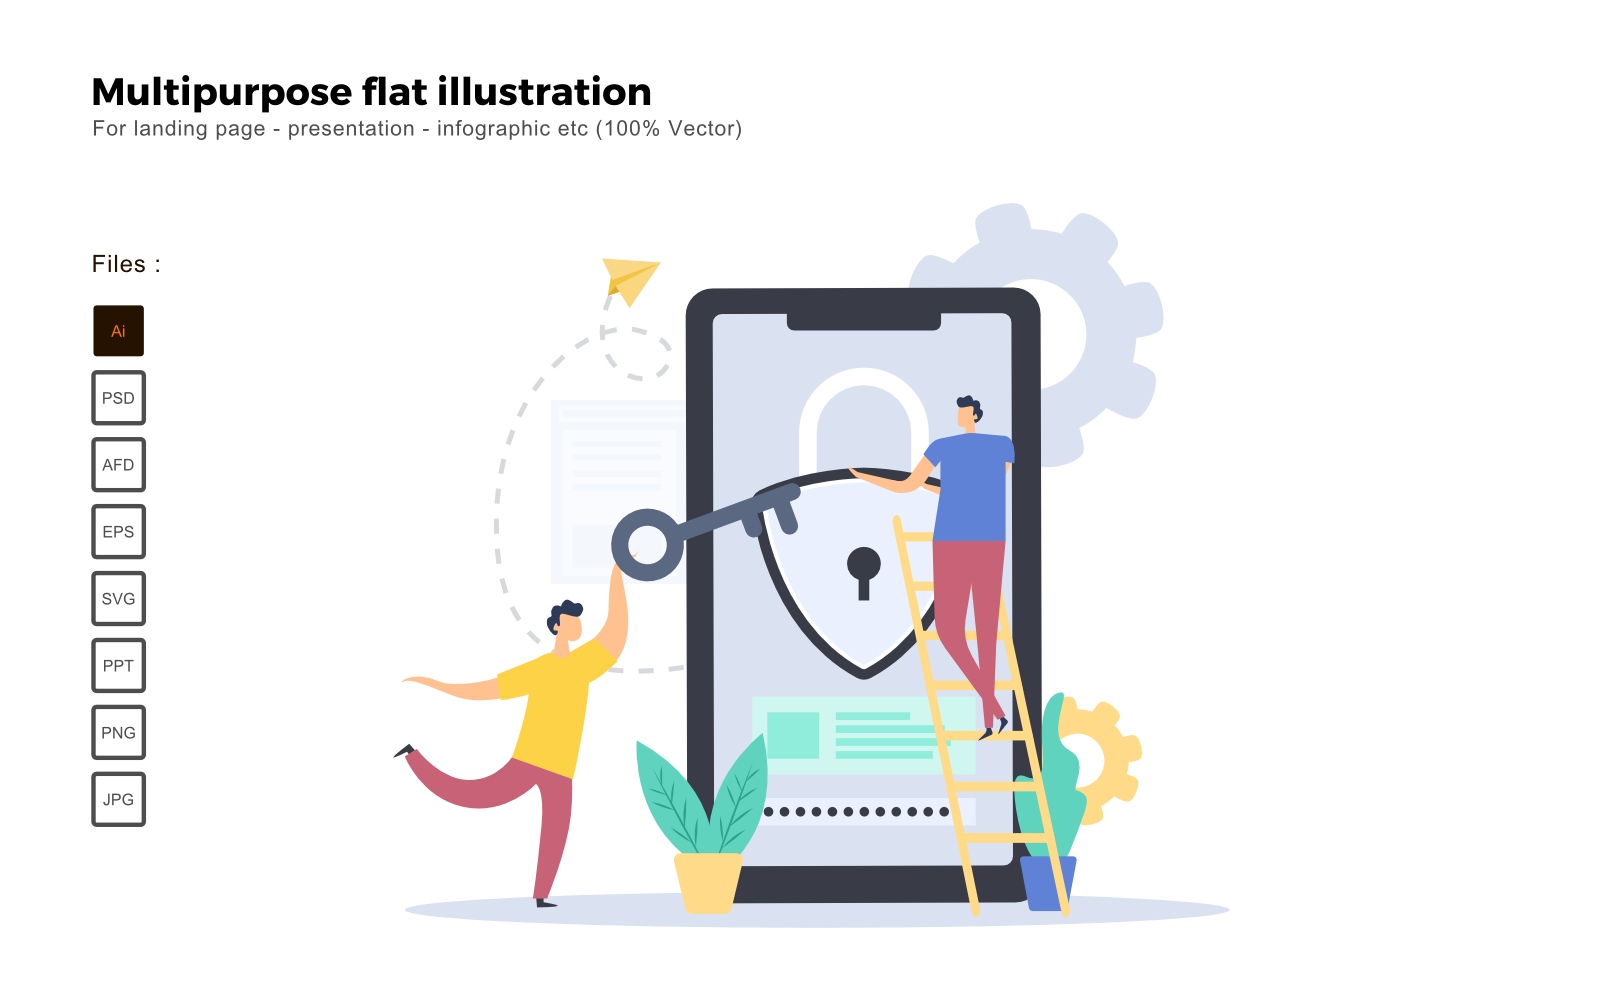 Multipurpose Flat Illustration Security Protection Apps - Vector Image